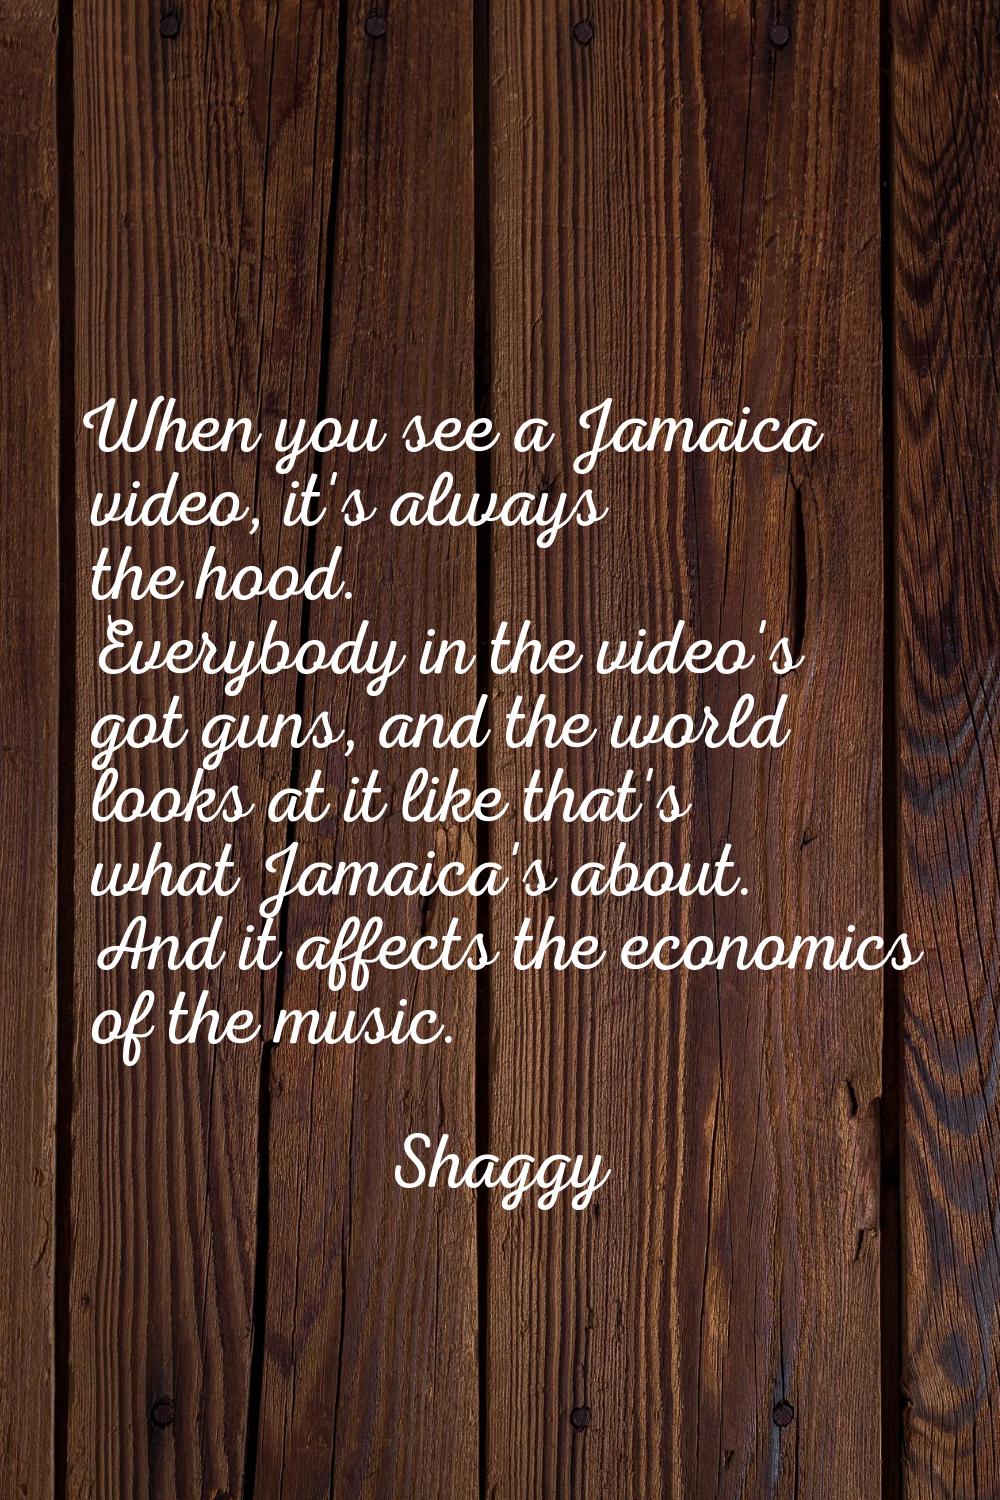 When you see a Jamaica video, it's always the hood. Everybody in the video's got guns, and the worl